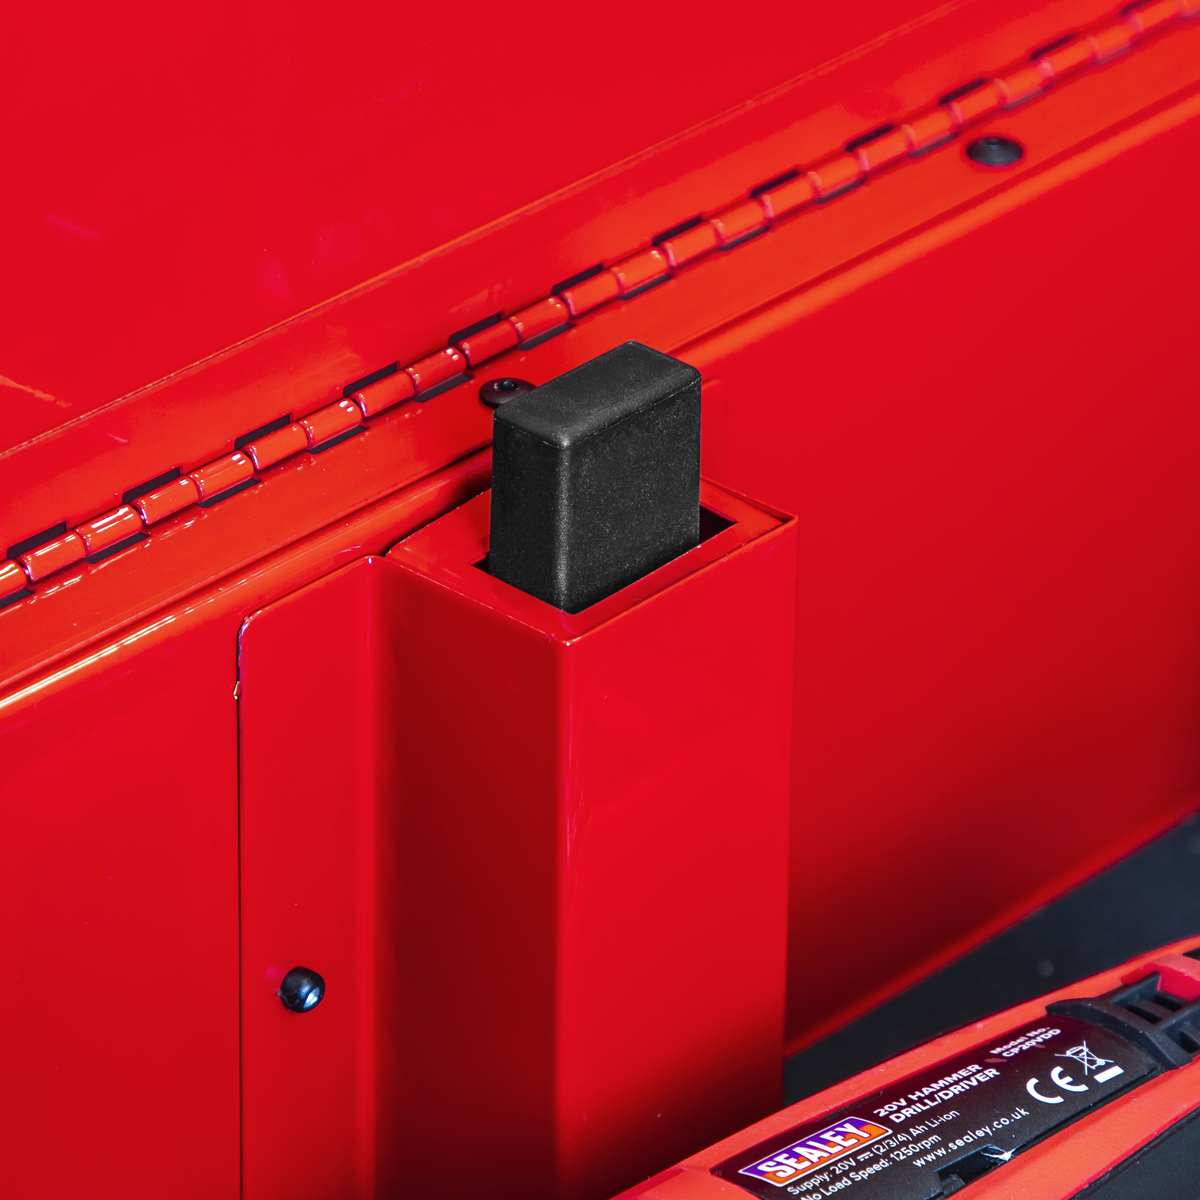 There are extra hand tool storage slots situated on either side within the top compartment.